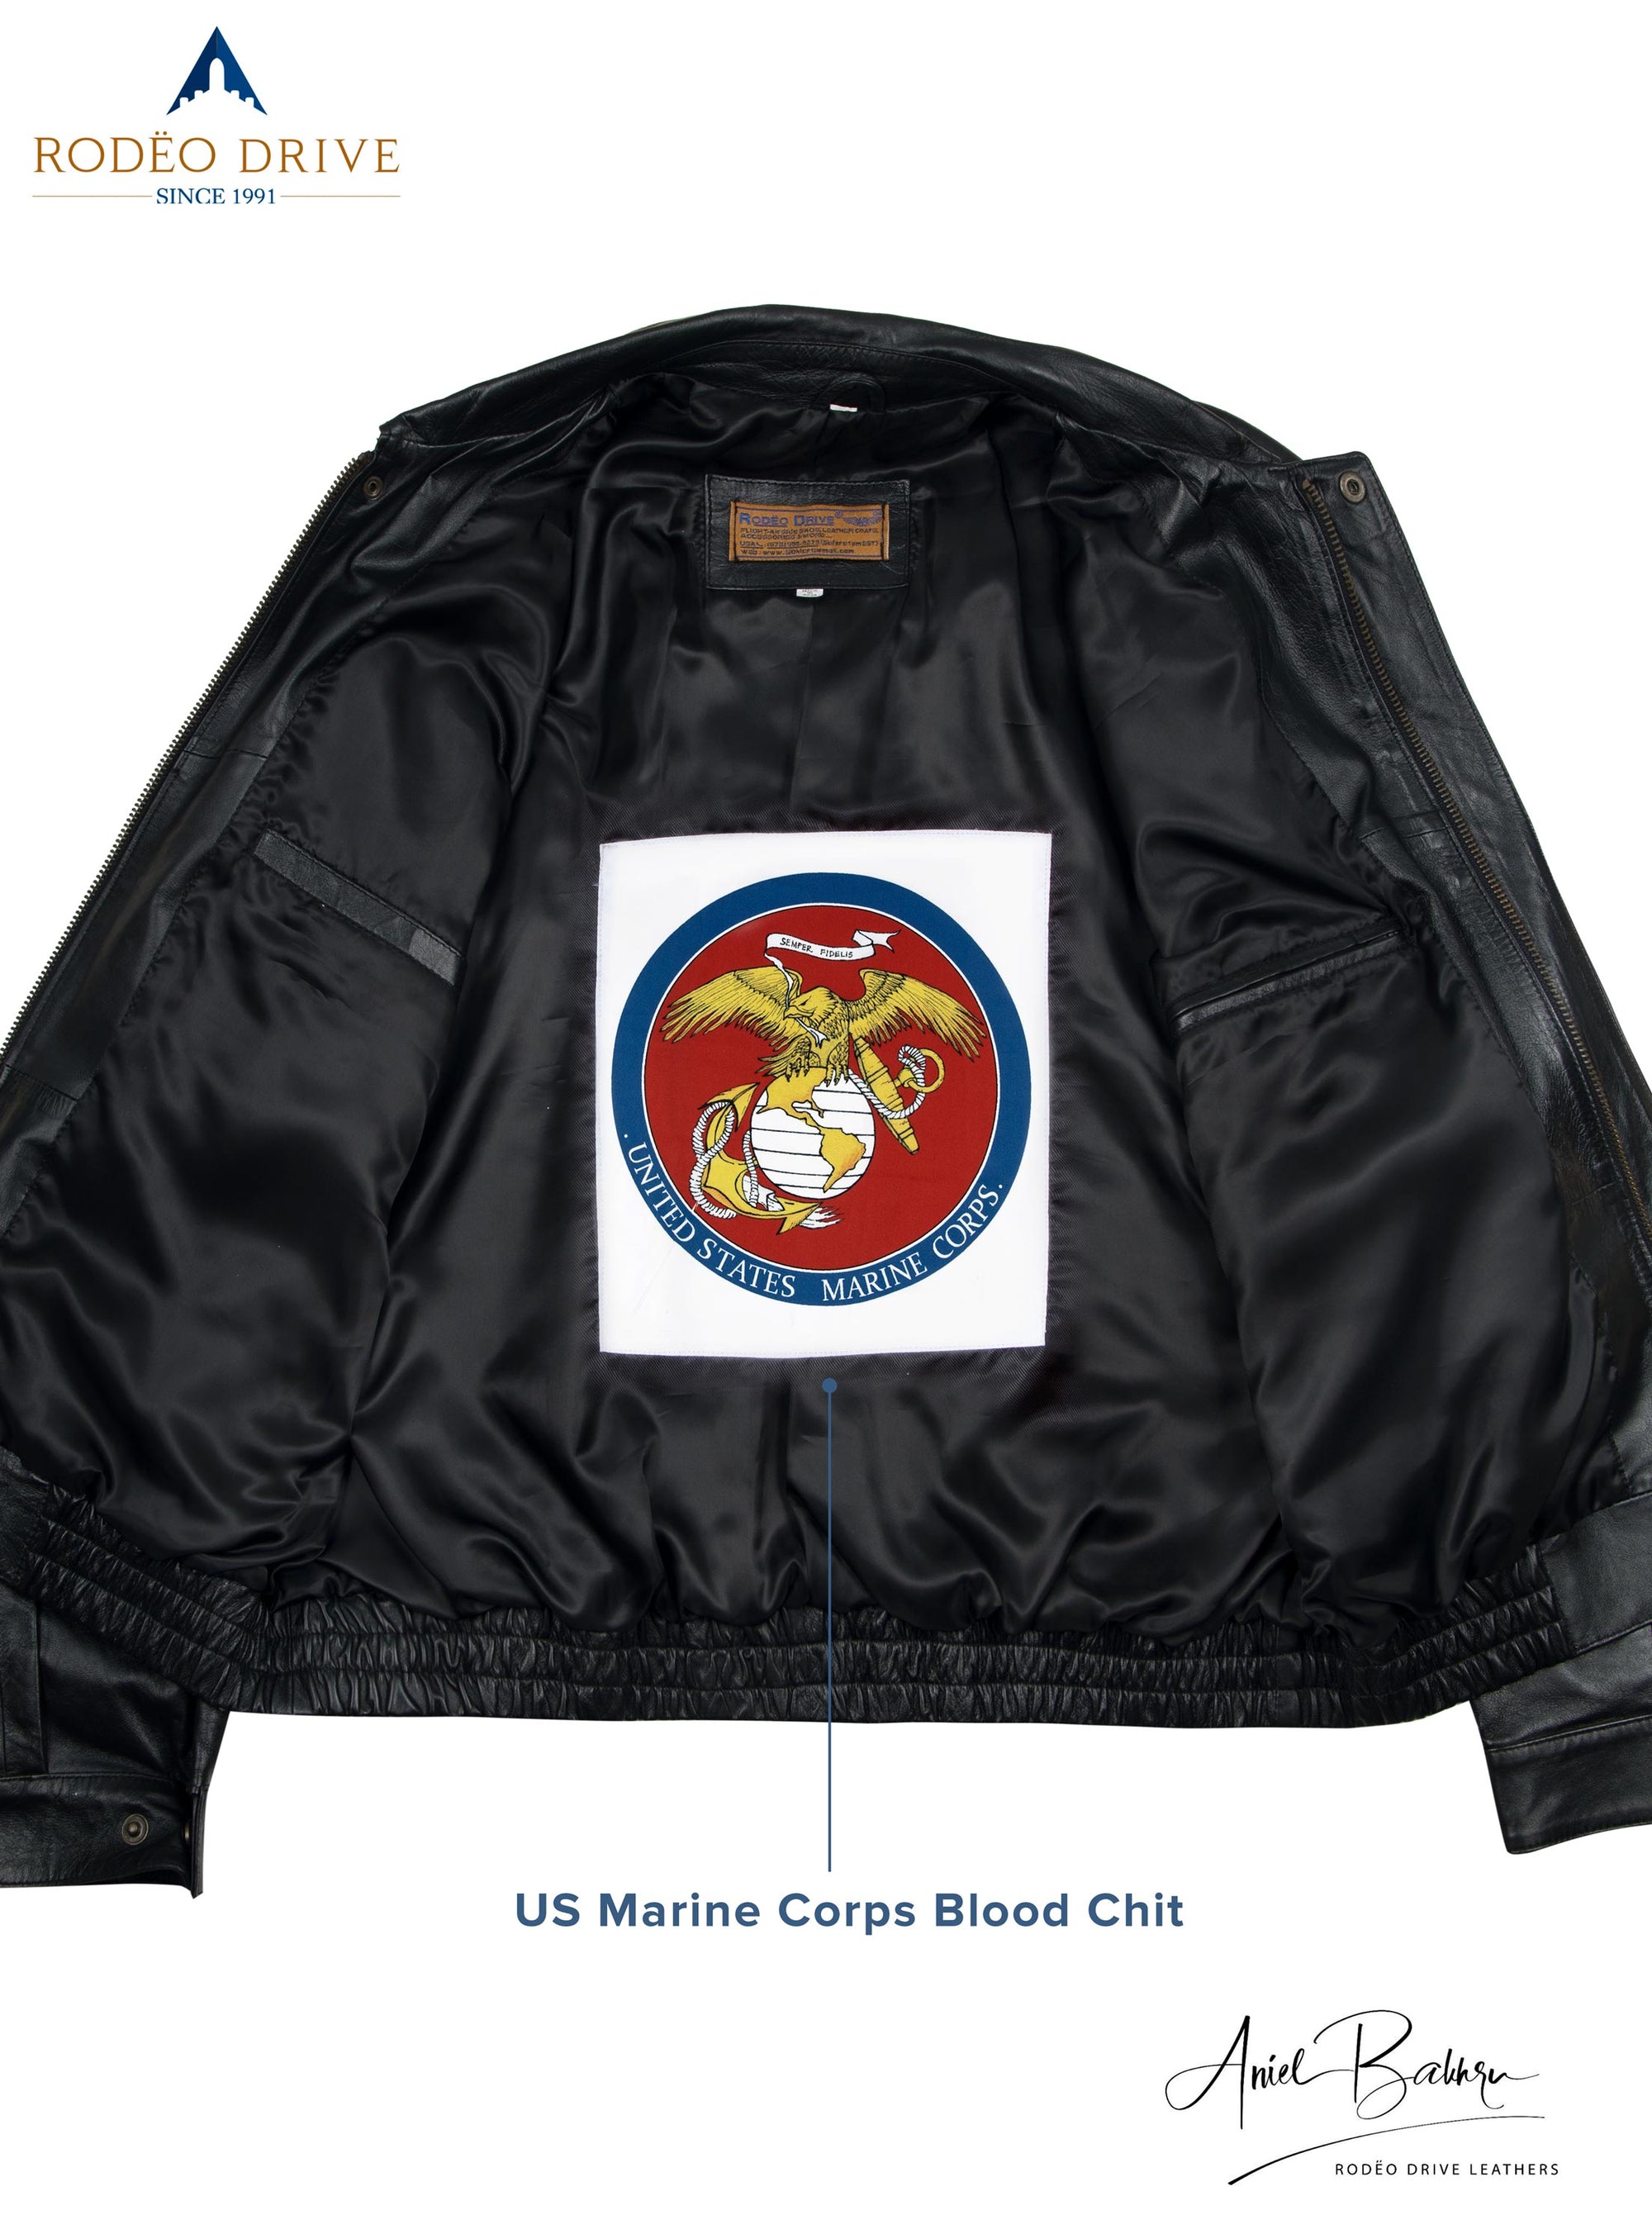 Inside image of ARMY HELICOPTER BOMBER JACKET. A US Marine Corps blood chit is sewed inside.